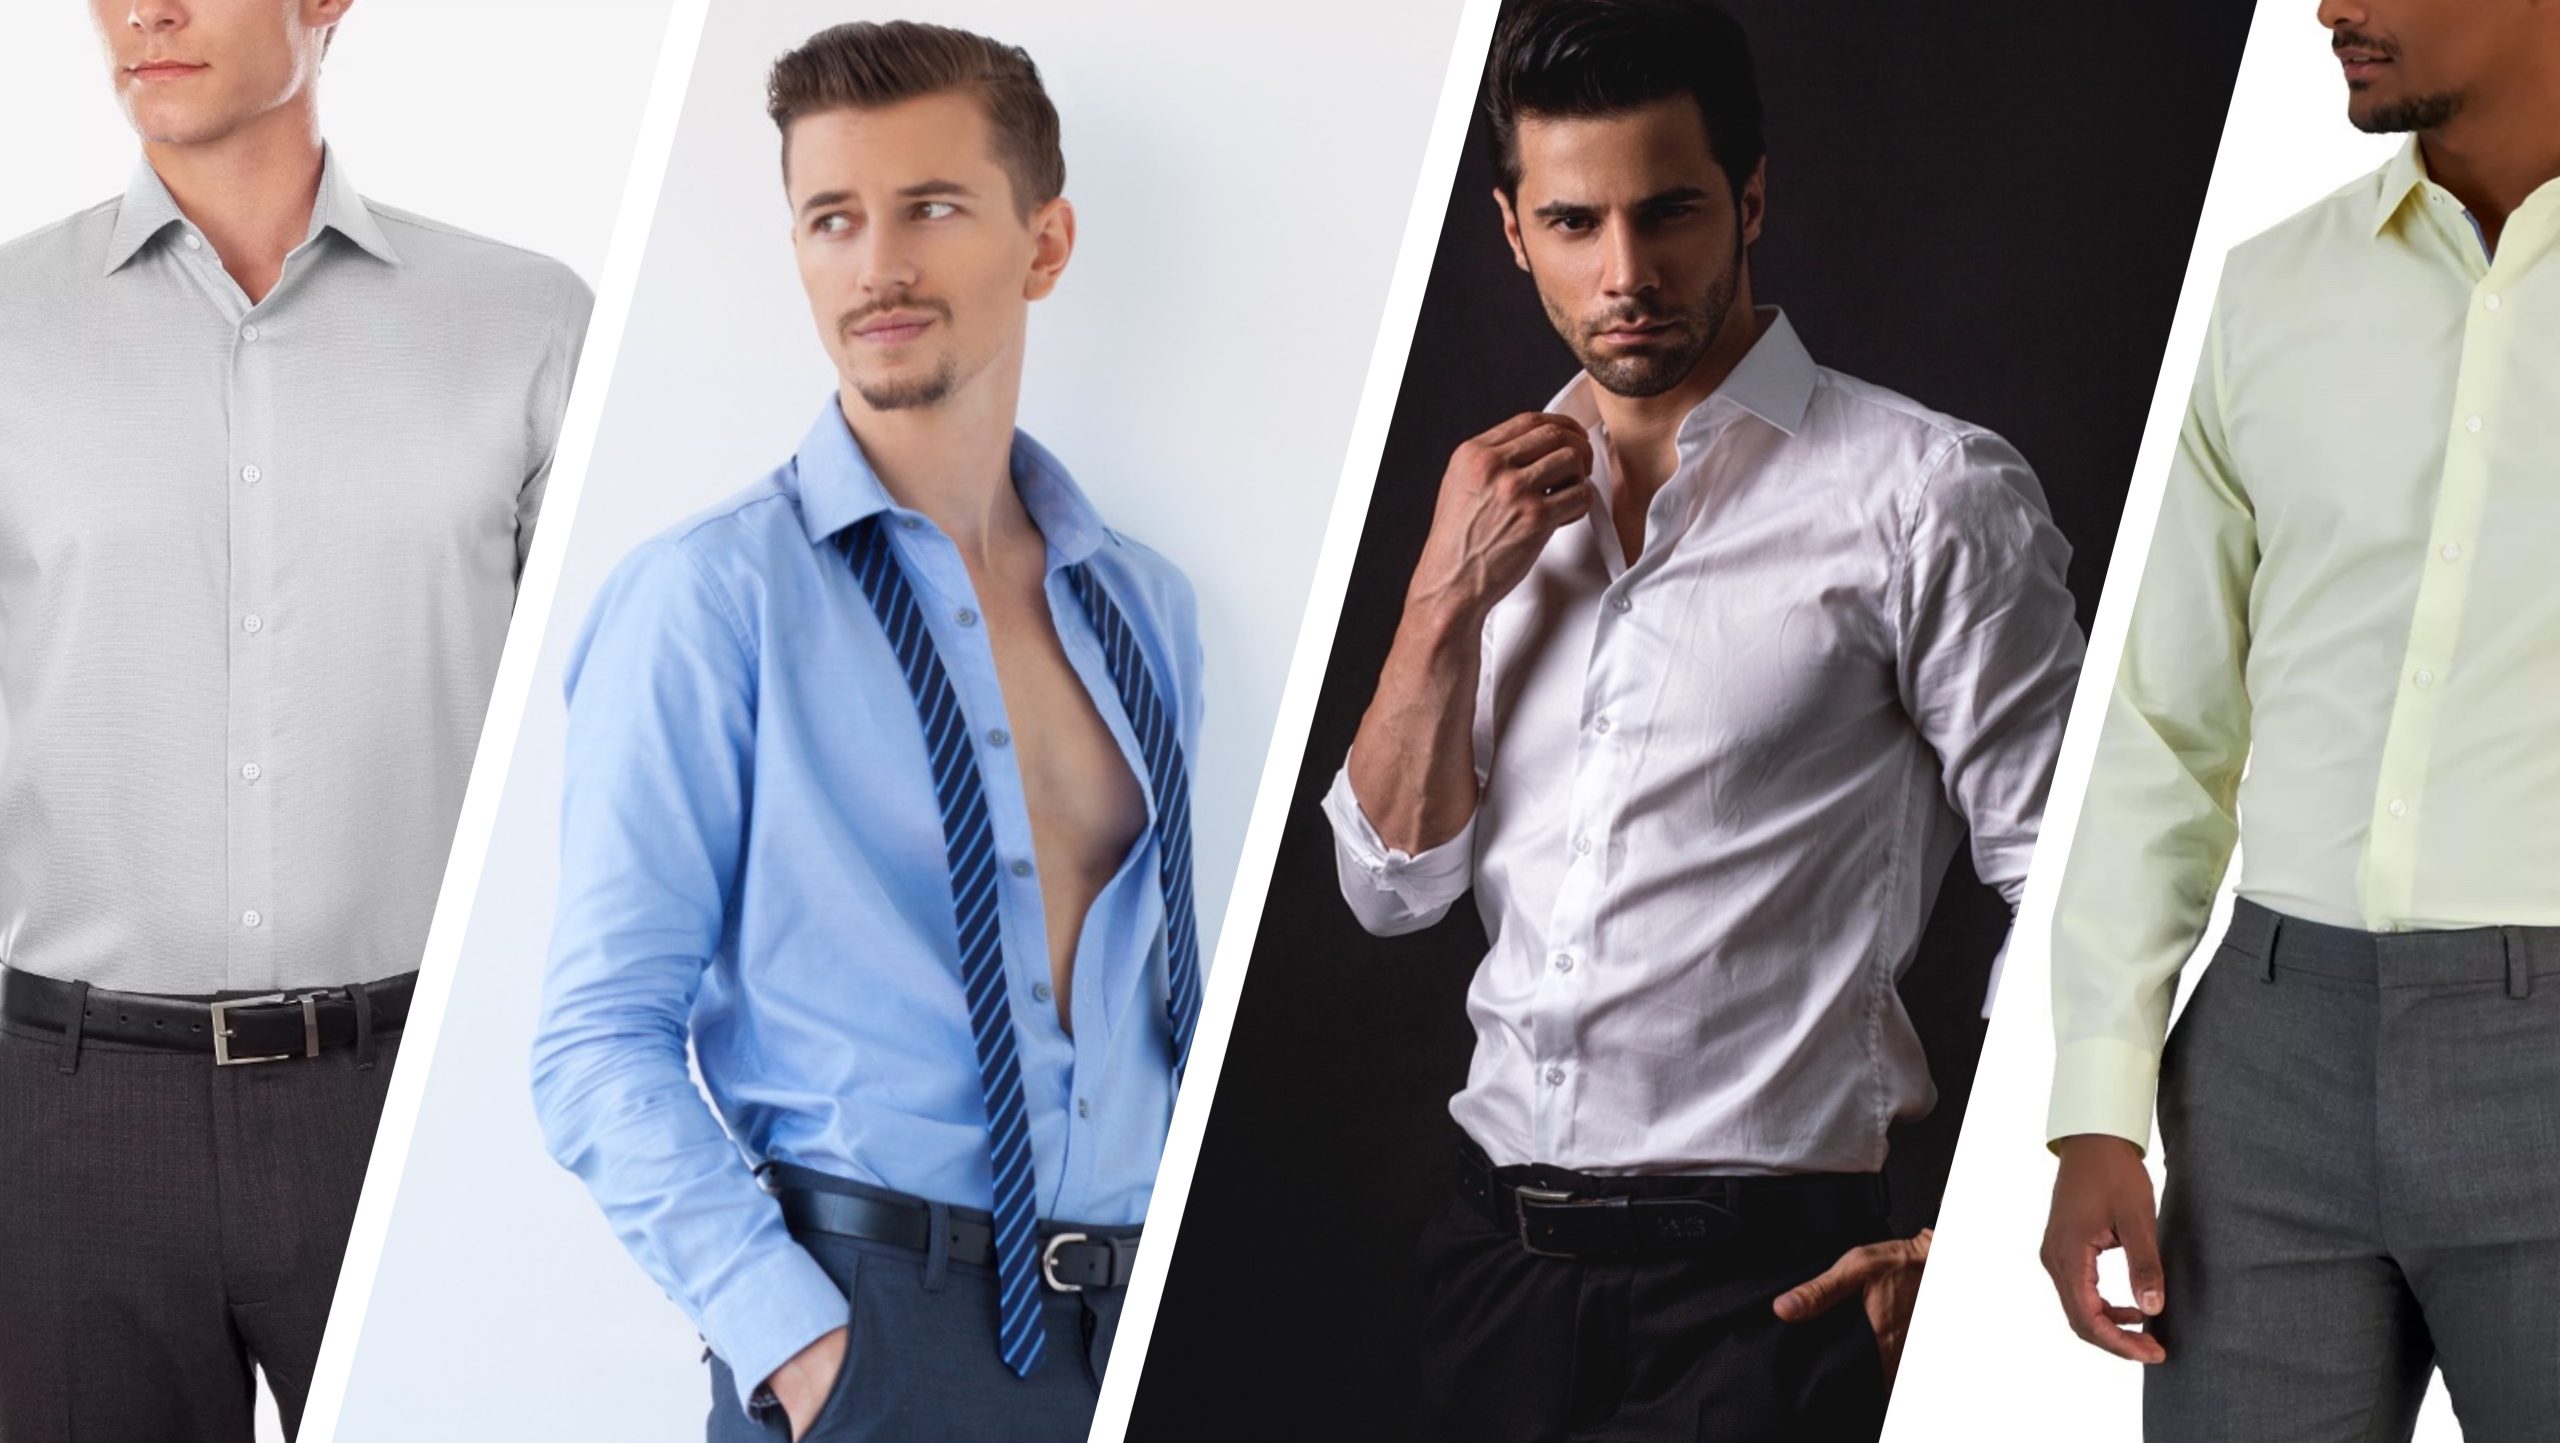 Men's Slim Fit Dress Shirts: Add On-Trend Appeal to Your Formal Wardrobe